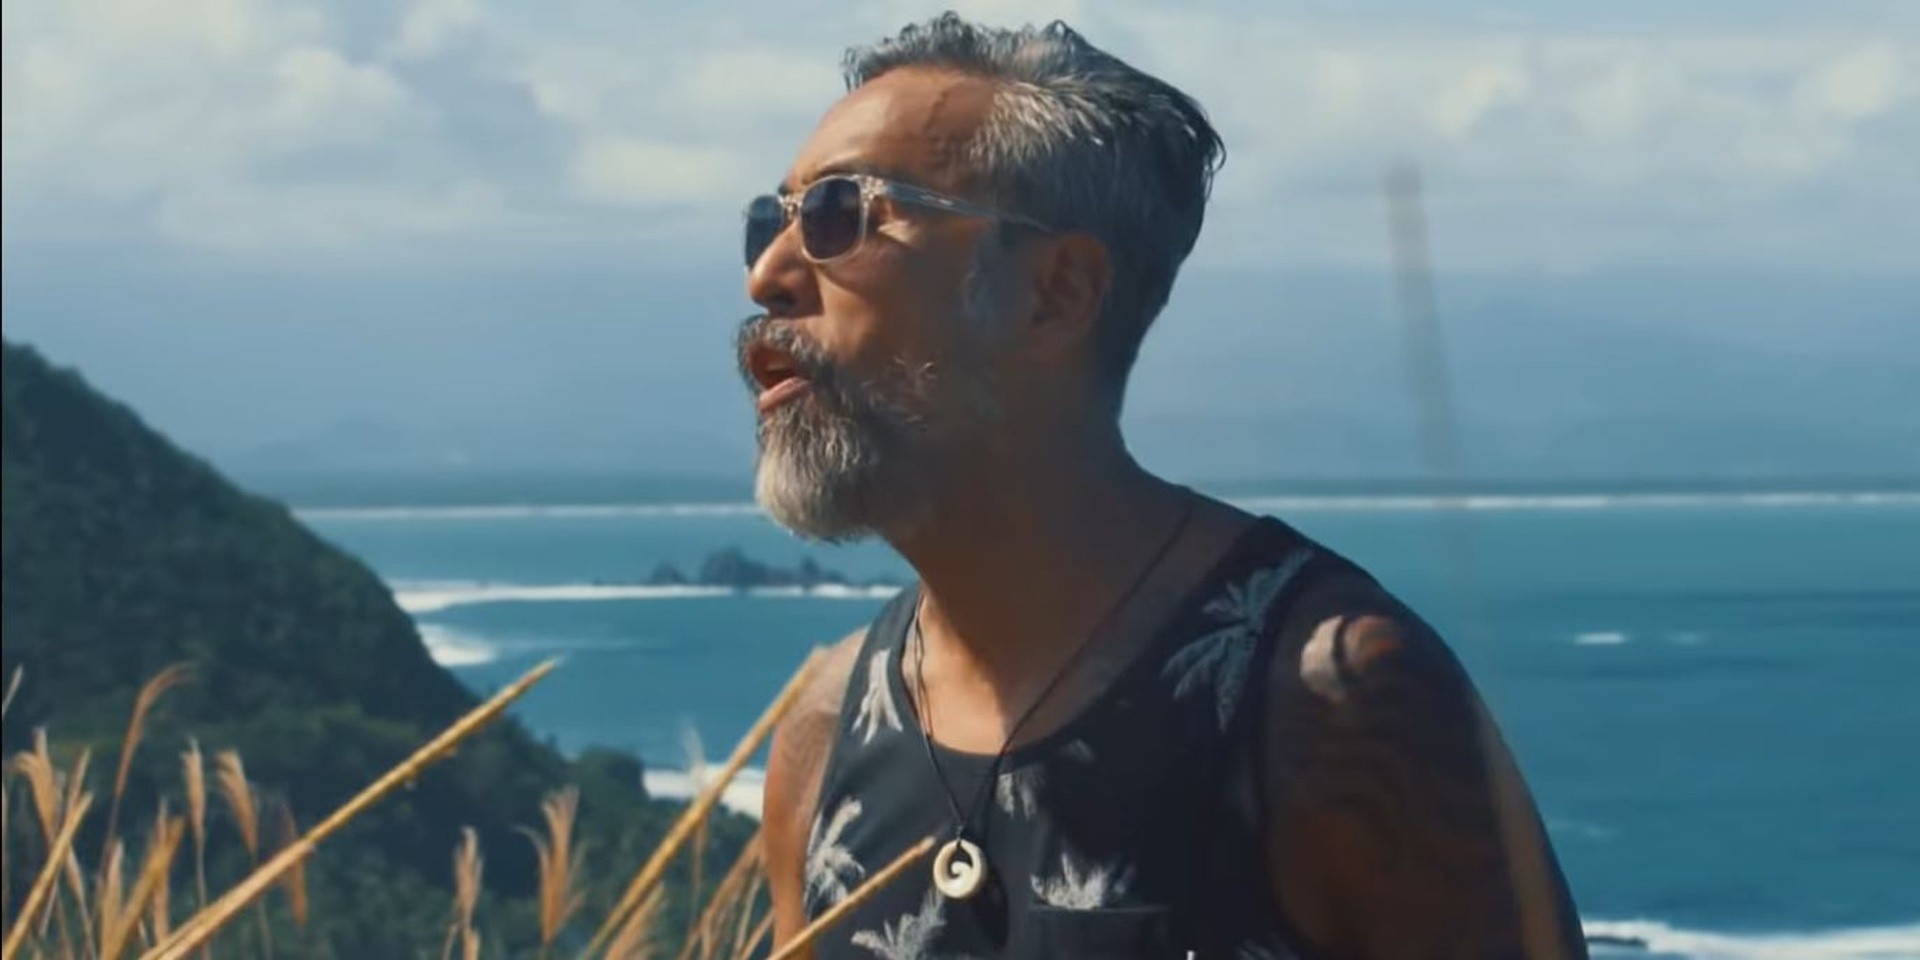 Franco rules the waves in stunning 'Aurora Sunrise' music video – watch